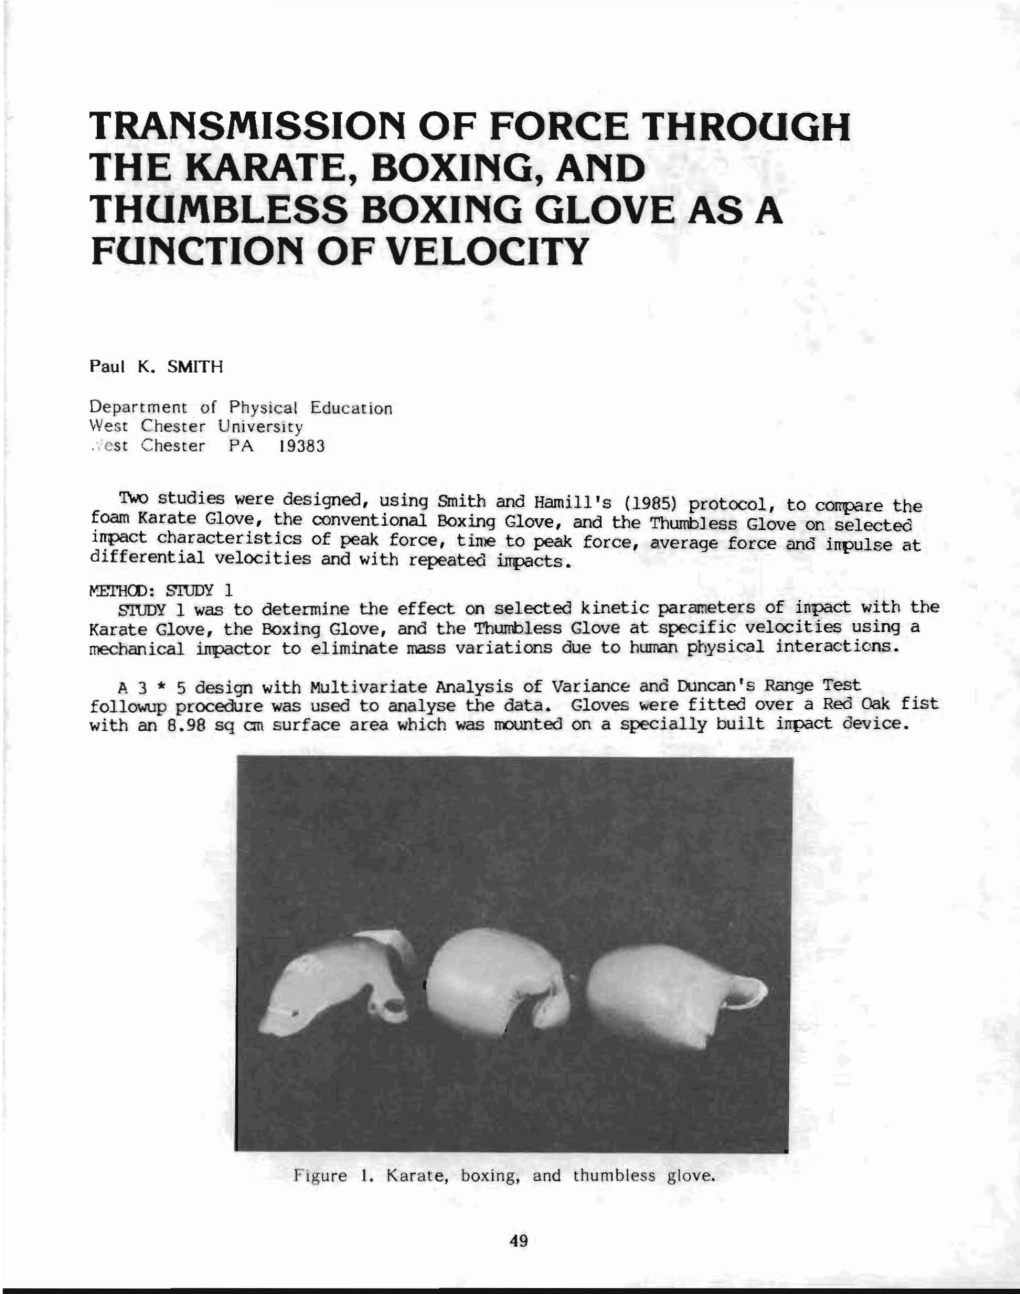 Transmission of Force Through the Karate, Boxing, and Thumbless Boxing Glove As a Function of Velocity